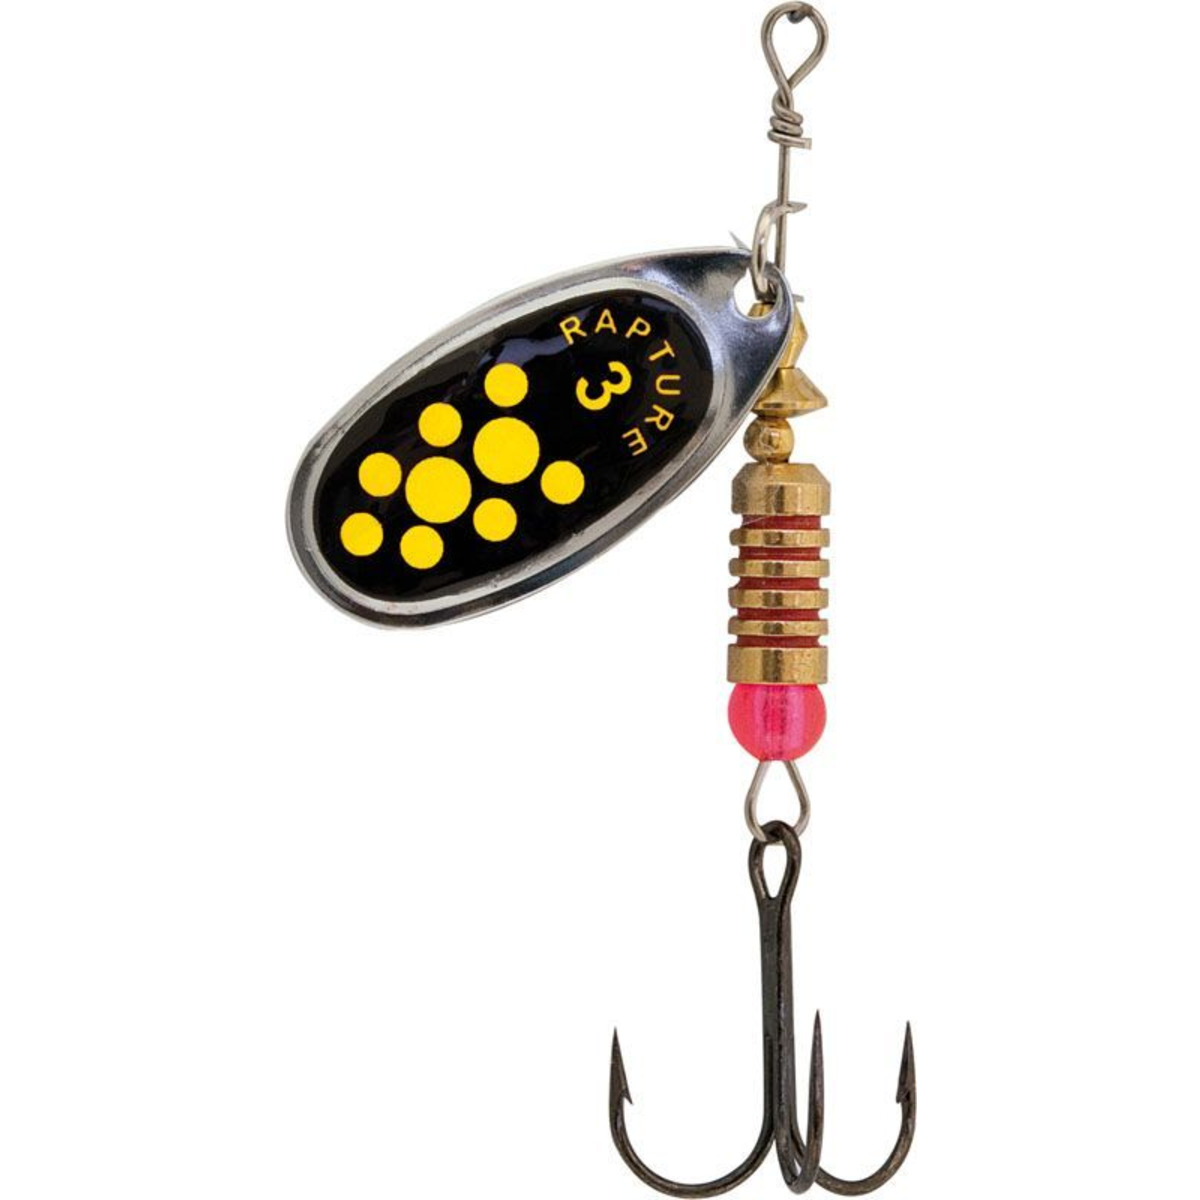 Rapture Spinner AGF - 5.0 g - Silver Blade Black/Yellow Dots